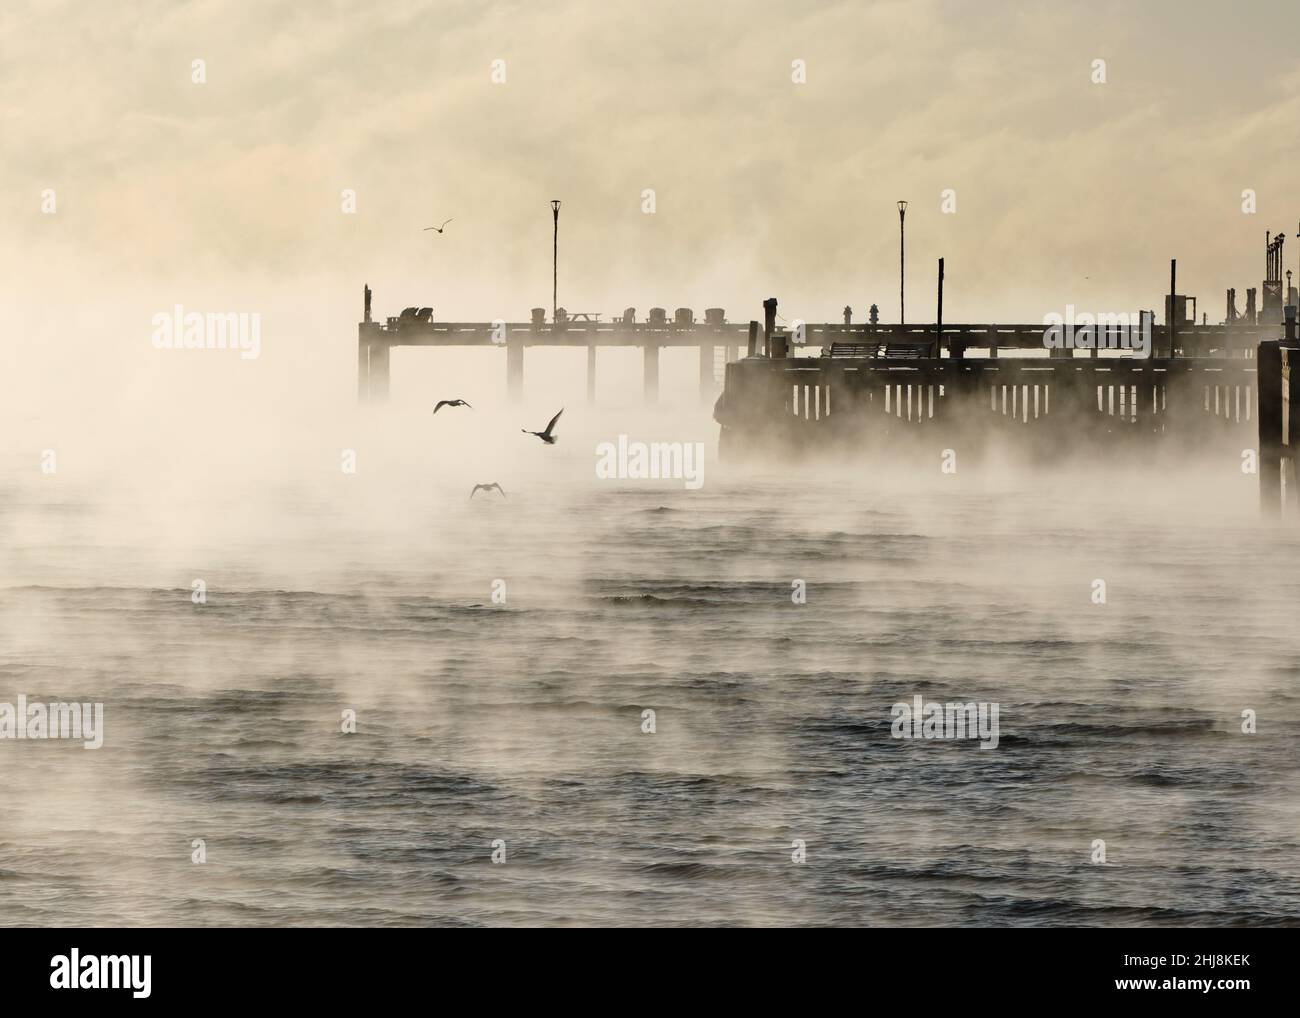 Halifax, Nova Scotia, Canada. January 27th, 2022. The Halifax boardwalk is engulfed in morning steam coming from ocean, as a cold front hits the city overnight, with real feel temperature dropping to -25C, steam fog rises from the harbour early this morning. Credit: meanderingemu/Alamy Live News Stock Photo